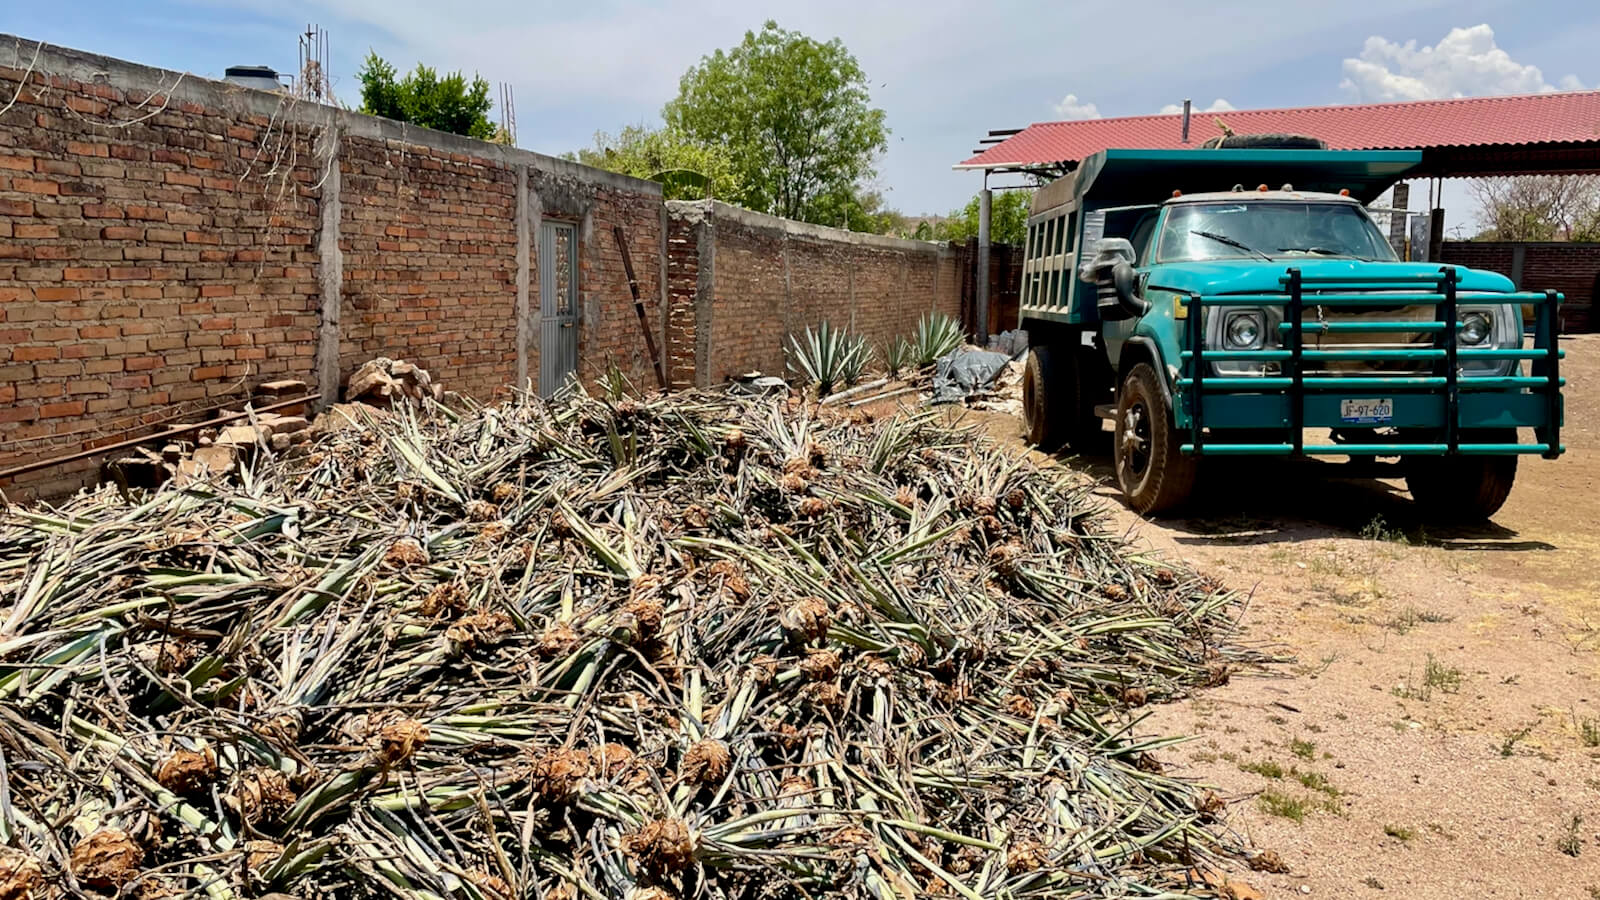 A pile of hijuelos (agave pups) sitting outside next to an old large green truck